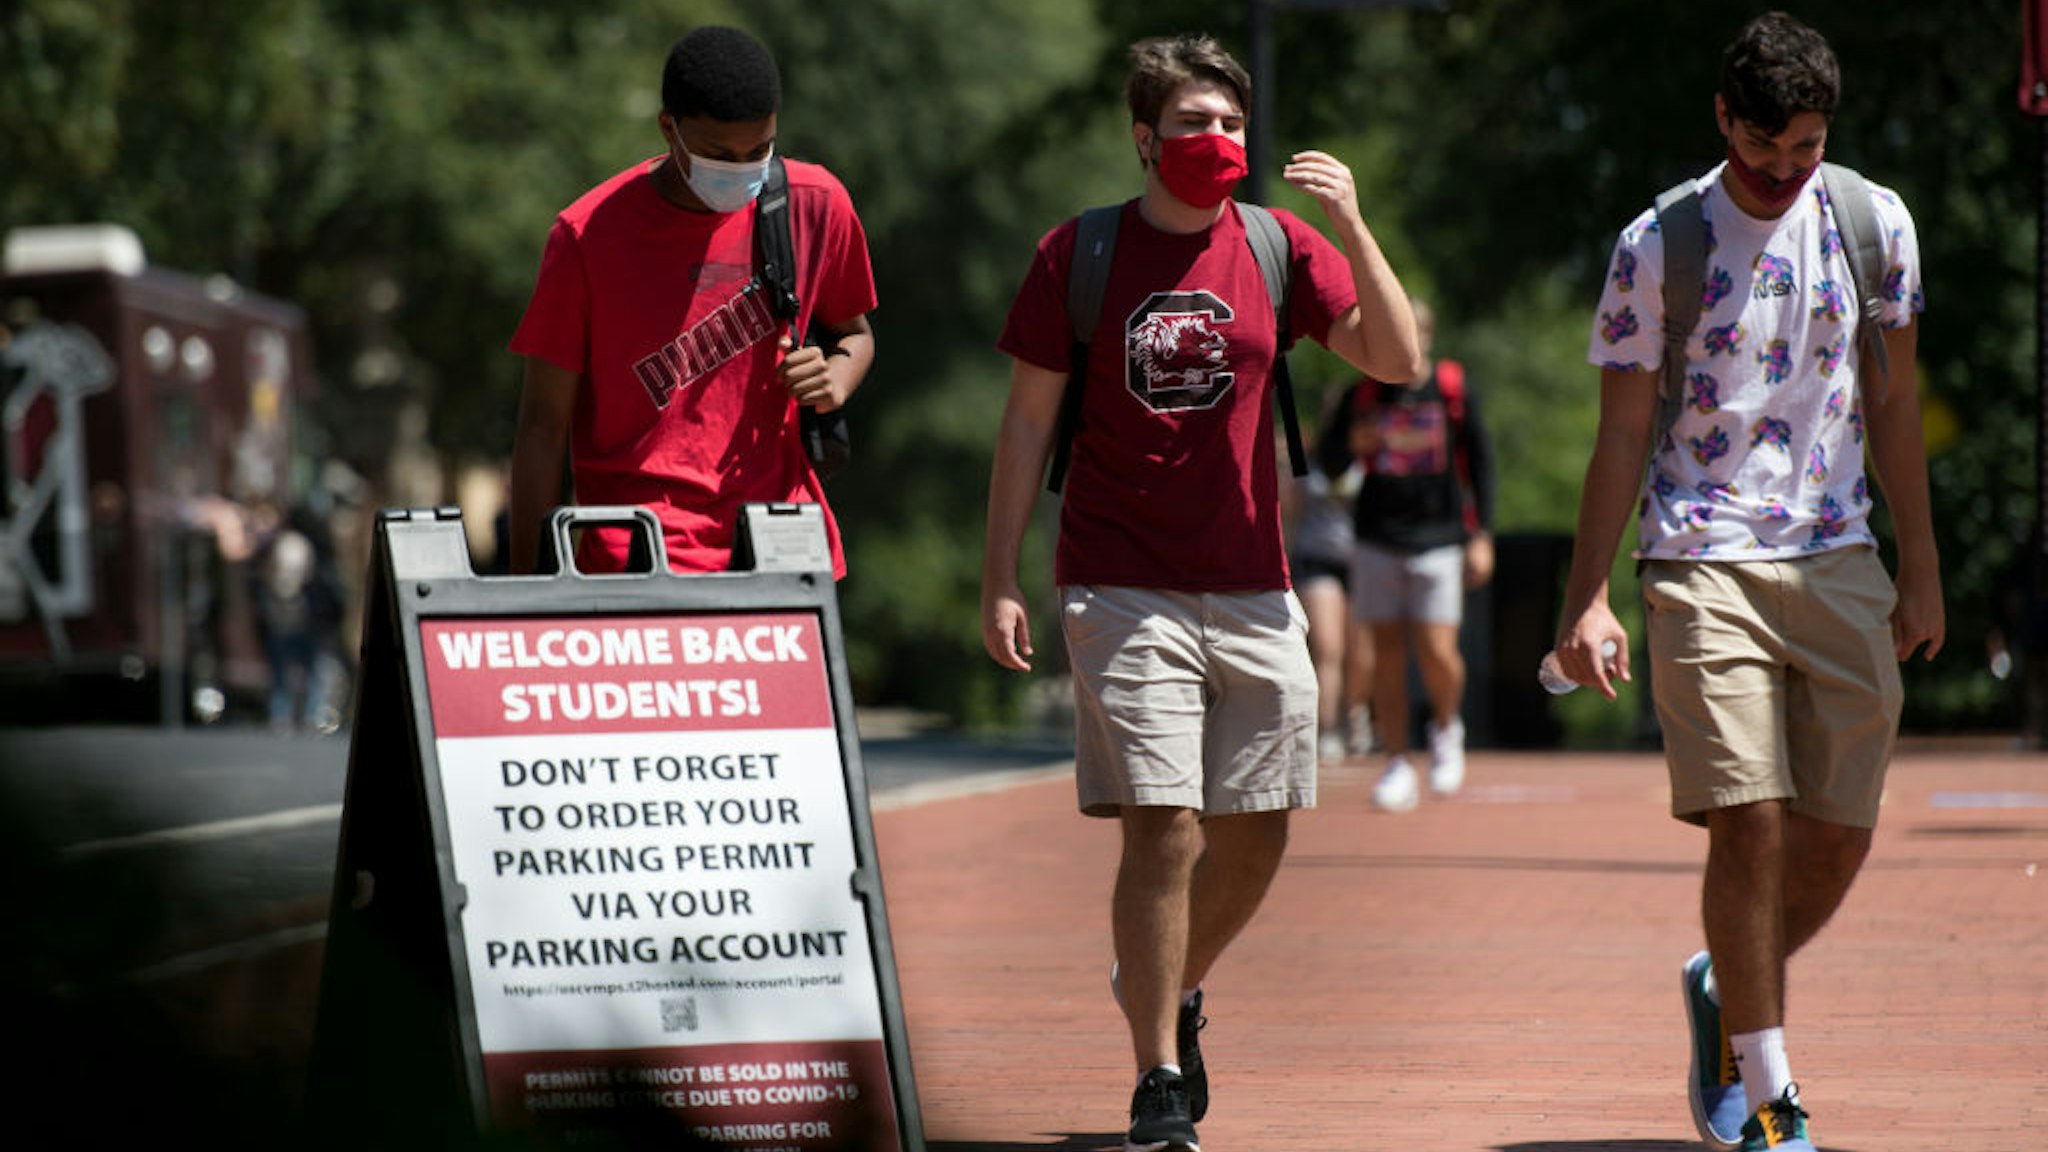 COLUMBIA, SC - SEPTEMBER 03: Students walk on campus at the University of South Carolina on September 3, 2020 in Columbia, South Carolina. During the final week of August, the university reported a 26.6 percent positivity rate among the student population tested for the COVID-19 virus. (Photo by Sean Rayford/Getty Images)